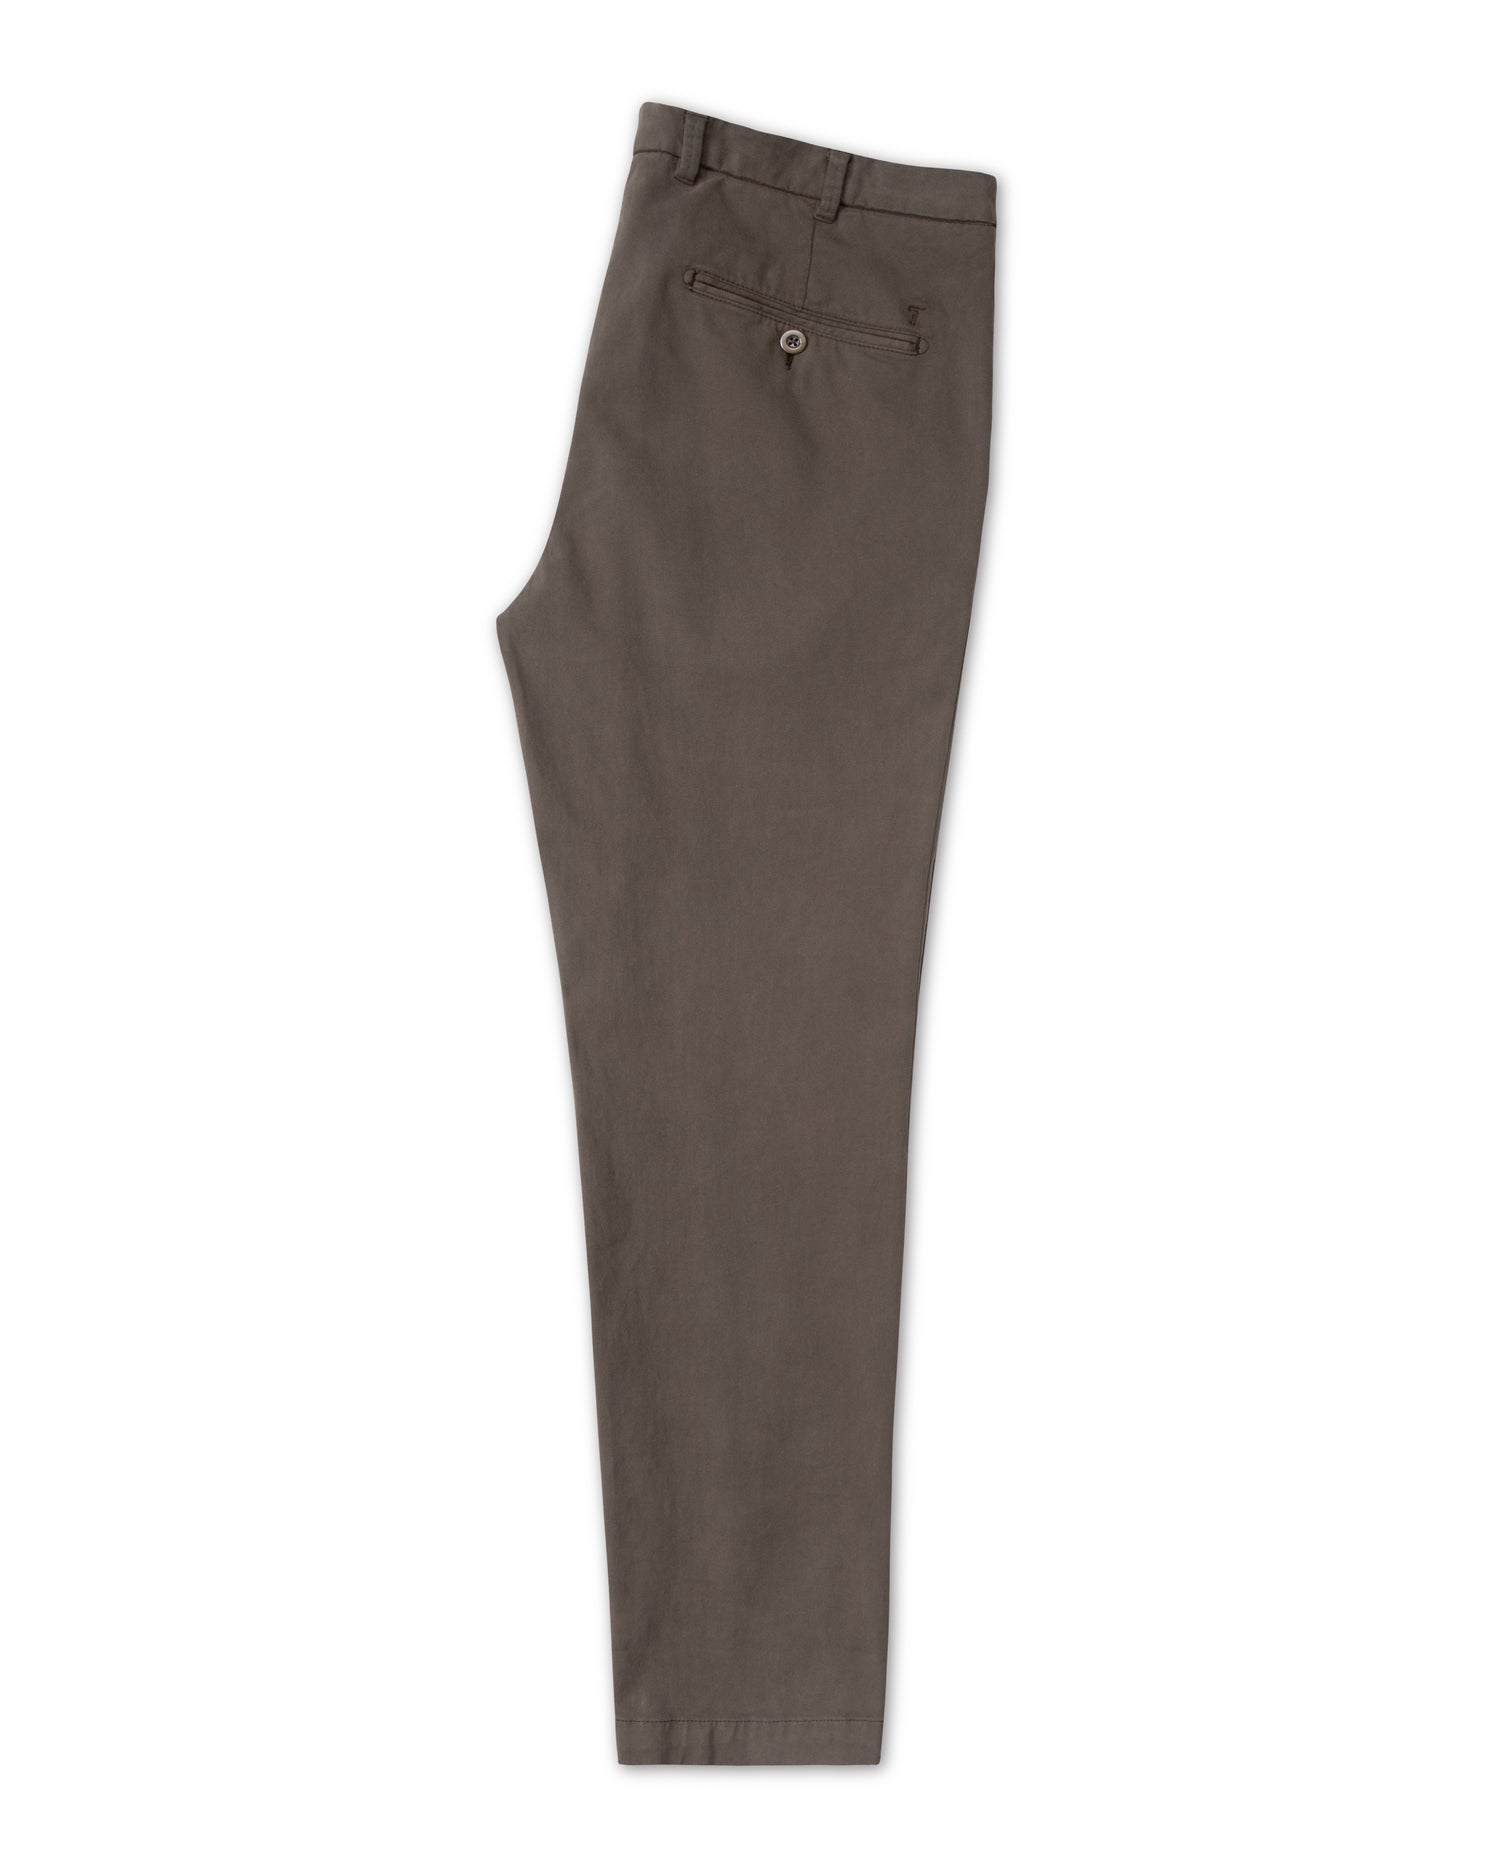 Casena Chinos in brown (8458967679306)